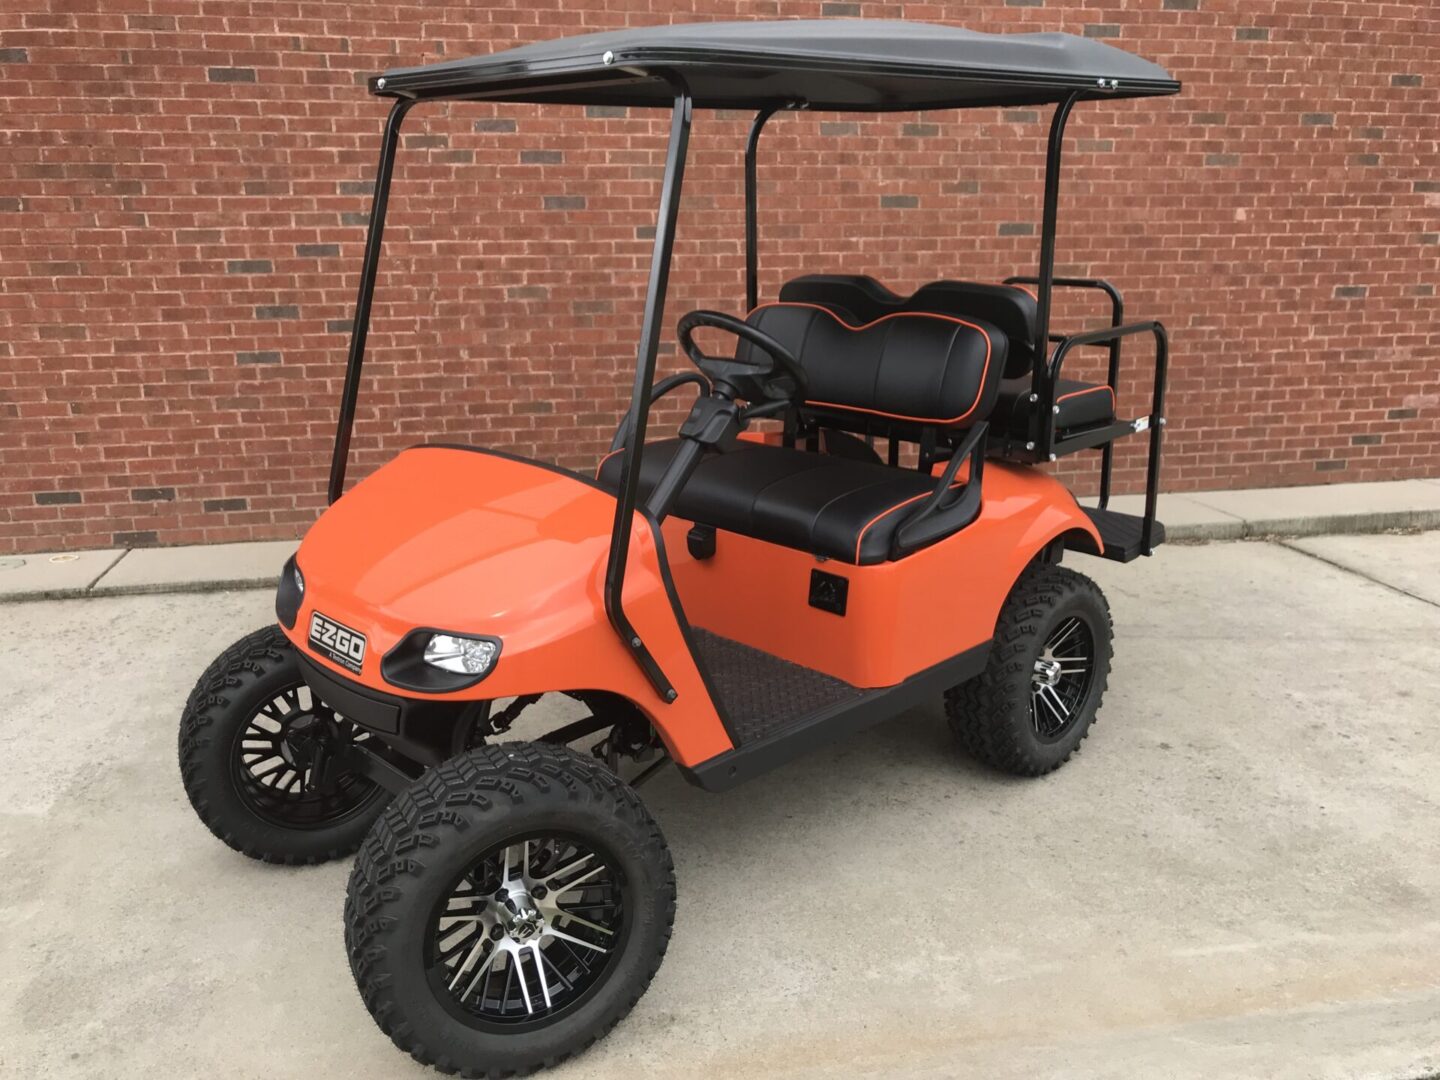 A golf cart with an orange body and black seat.